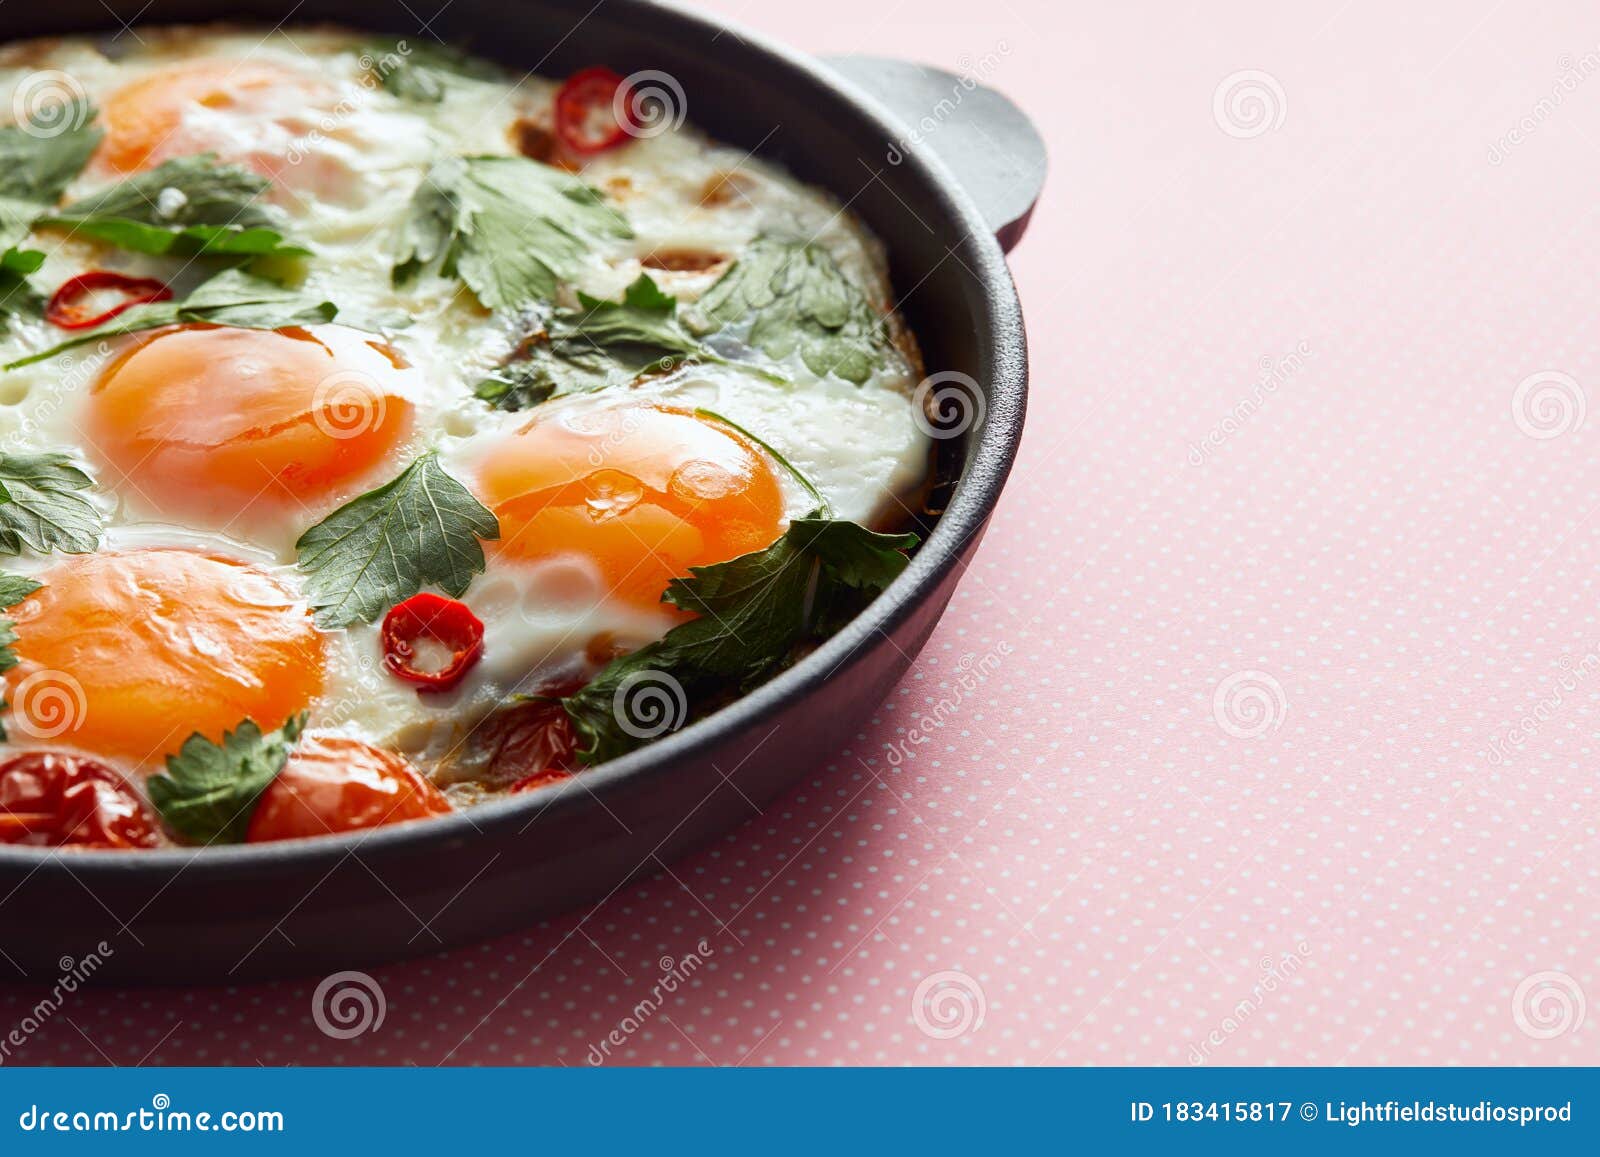 Close Up View Of Fried Eggs With Parsley Tomatoes And Chili Pepper In Frying Pan On Pink Background Stock Image Image Of People Fried 183415817